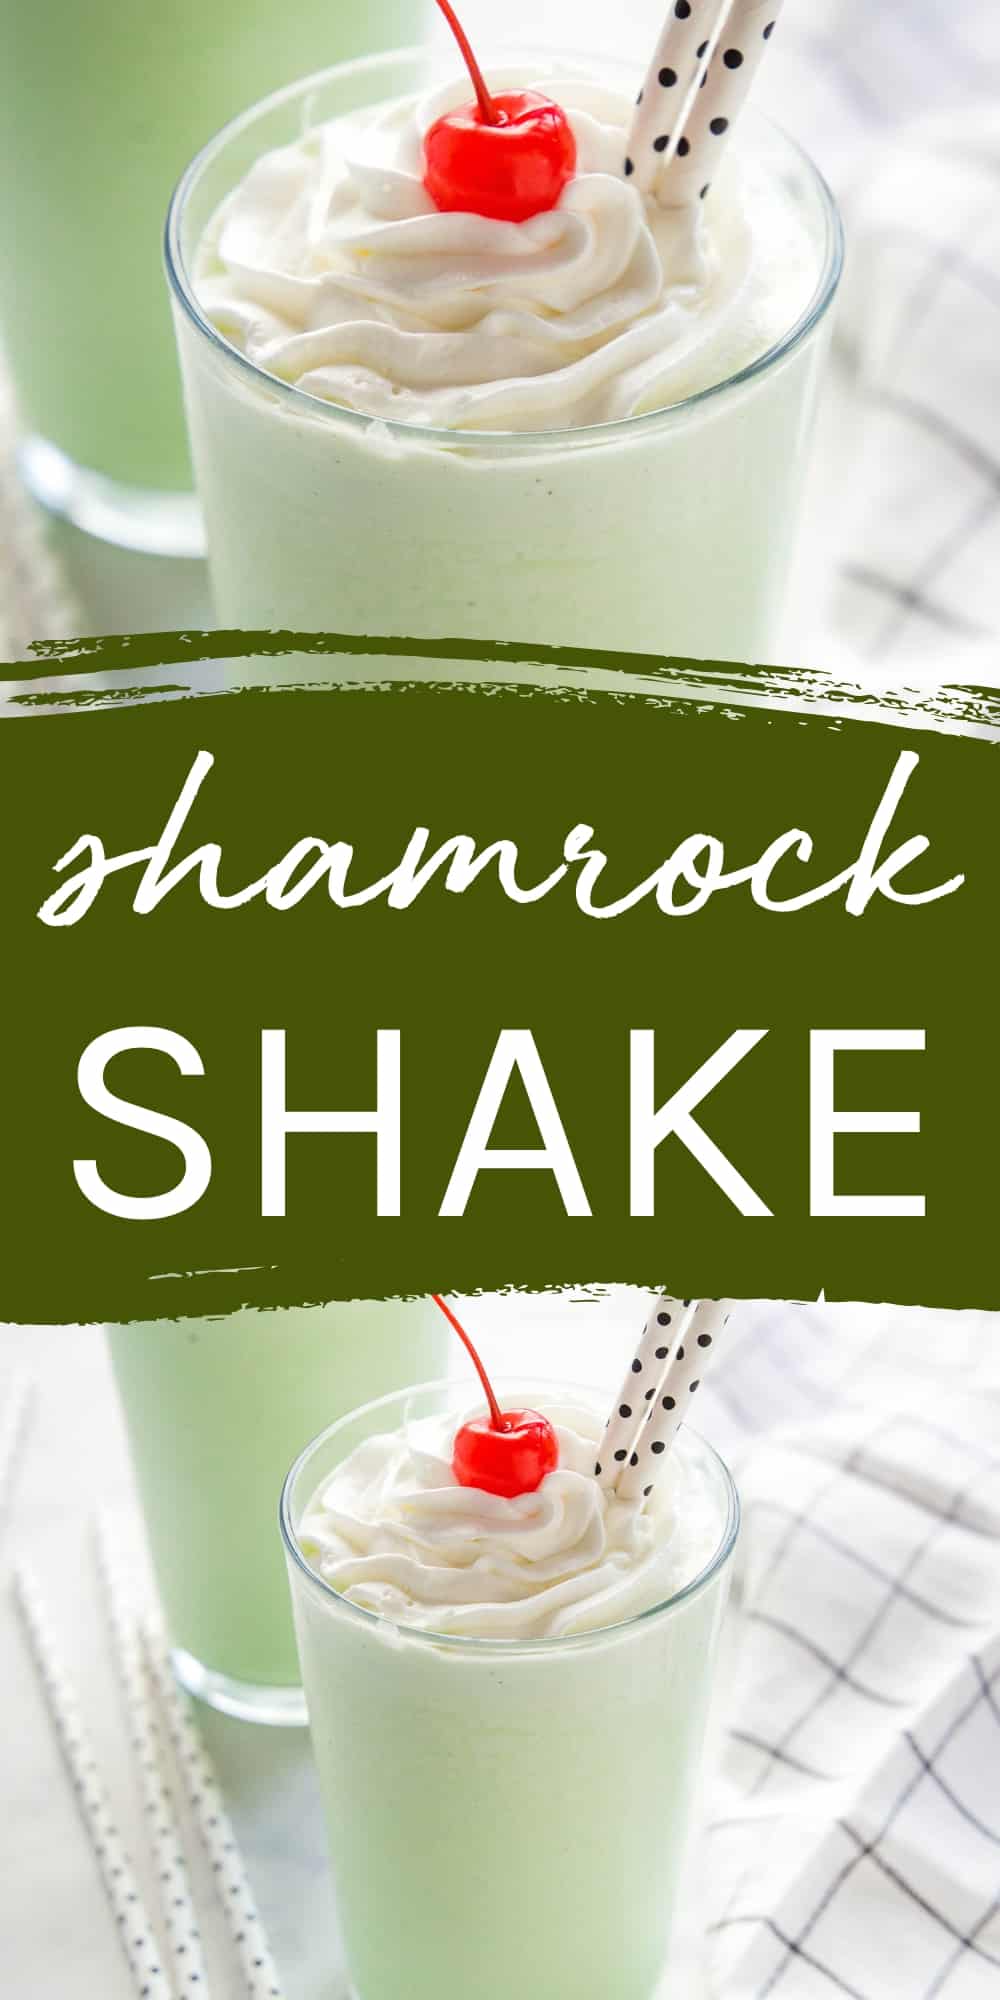 This Shamrock Shake recipe is a copycat of everybody's favourite McDonald's St. Patrick's Day treat. A creamy vanilla and mint milkshake topped with whipped cream! Recipe from thebusybaker.ca! #shamrockshake #copycatshamrockshake #stpatricksday #mintmilkshake #milkshake via @busybakerblog